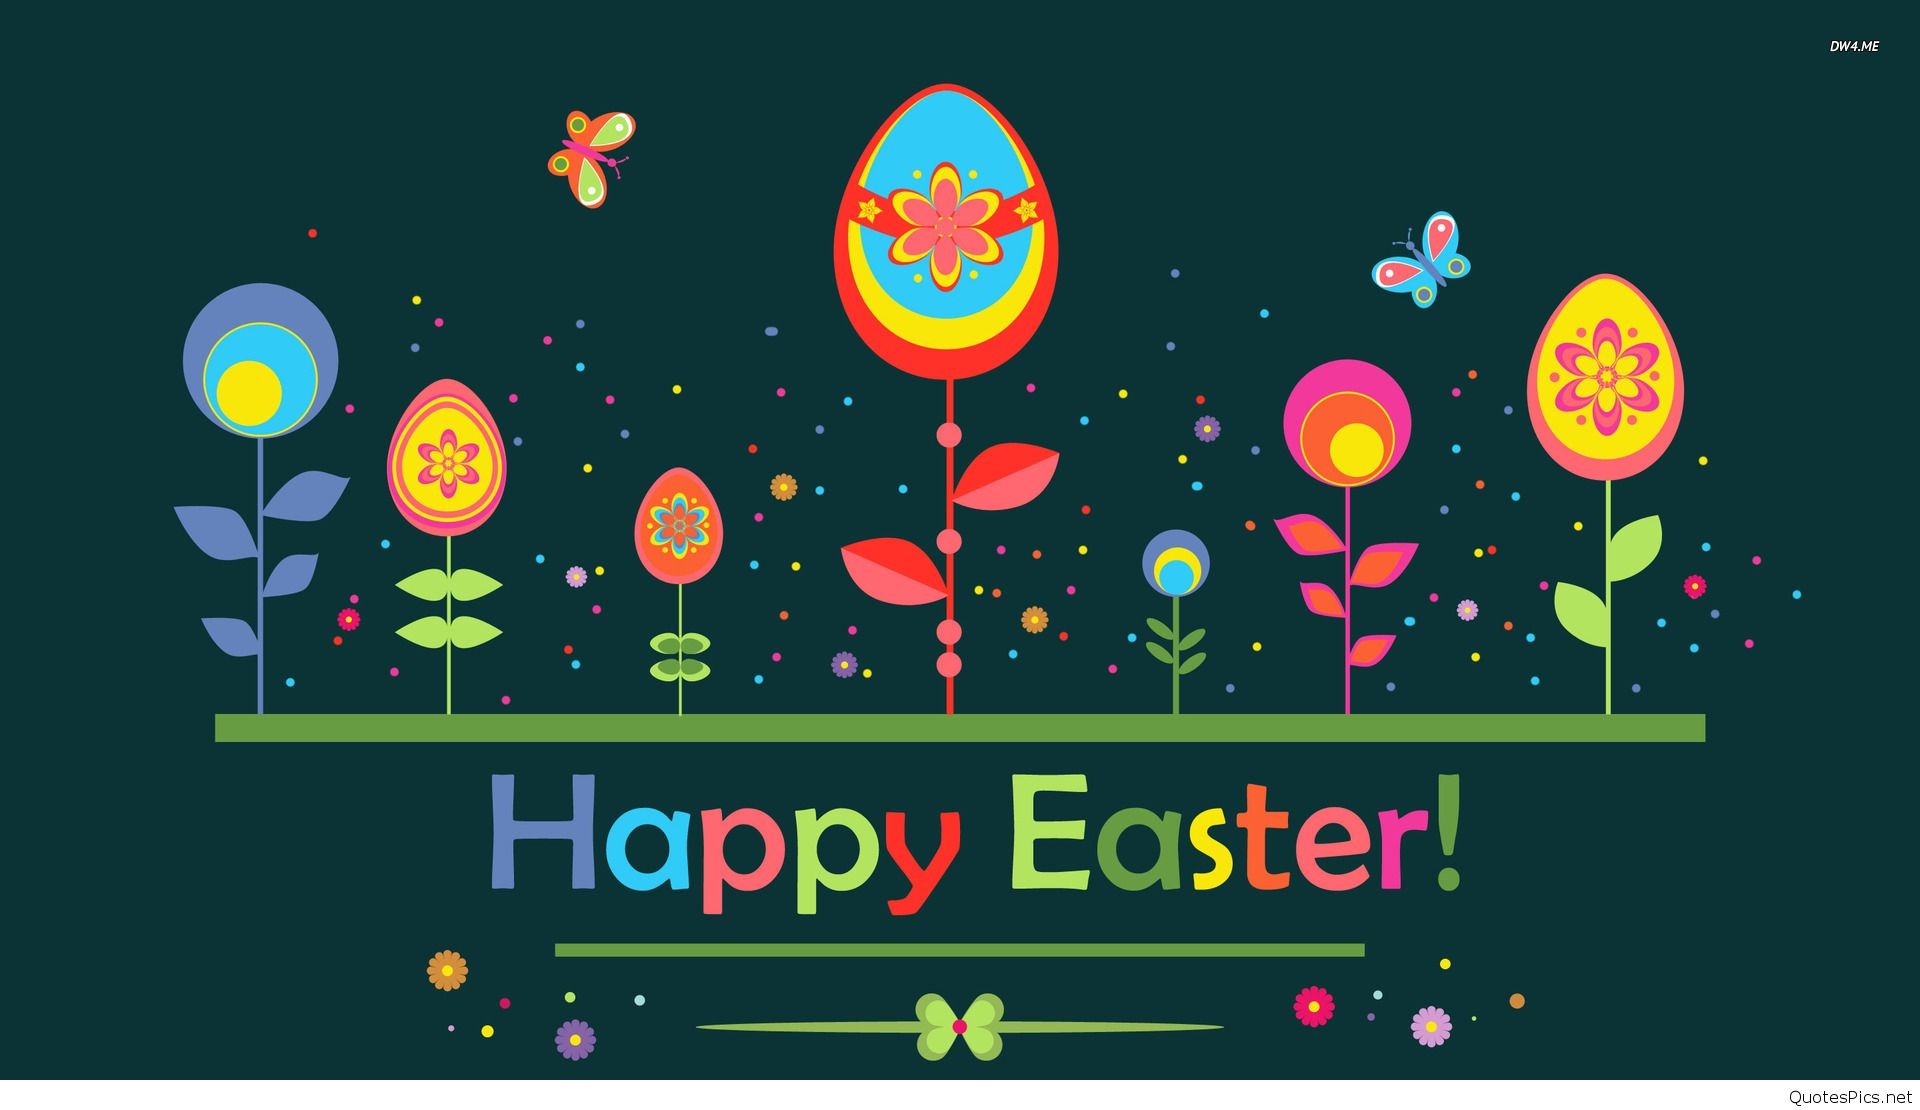 1920x1110 ... Religion-happy-Easter-desktop-background-images-wallpapers ...